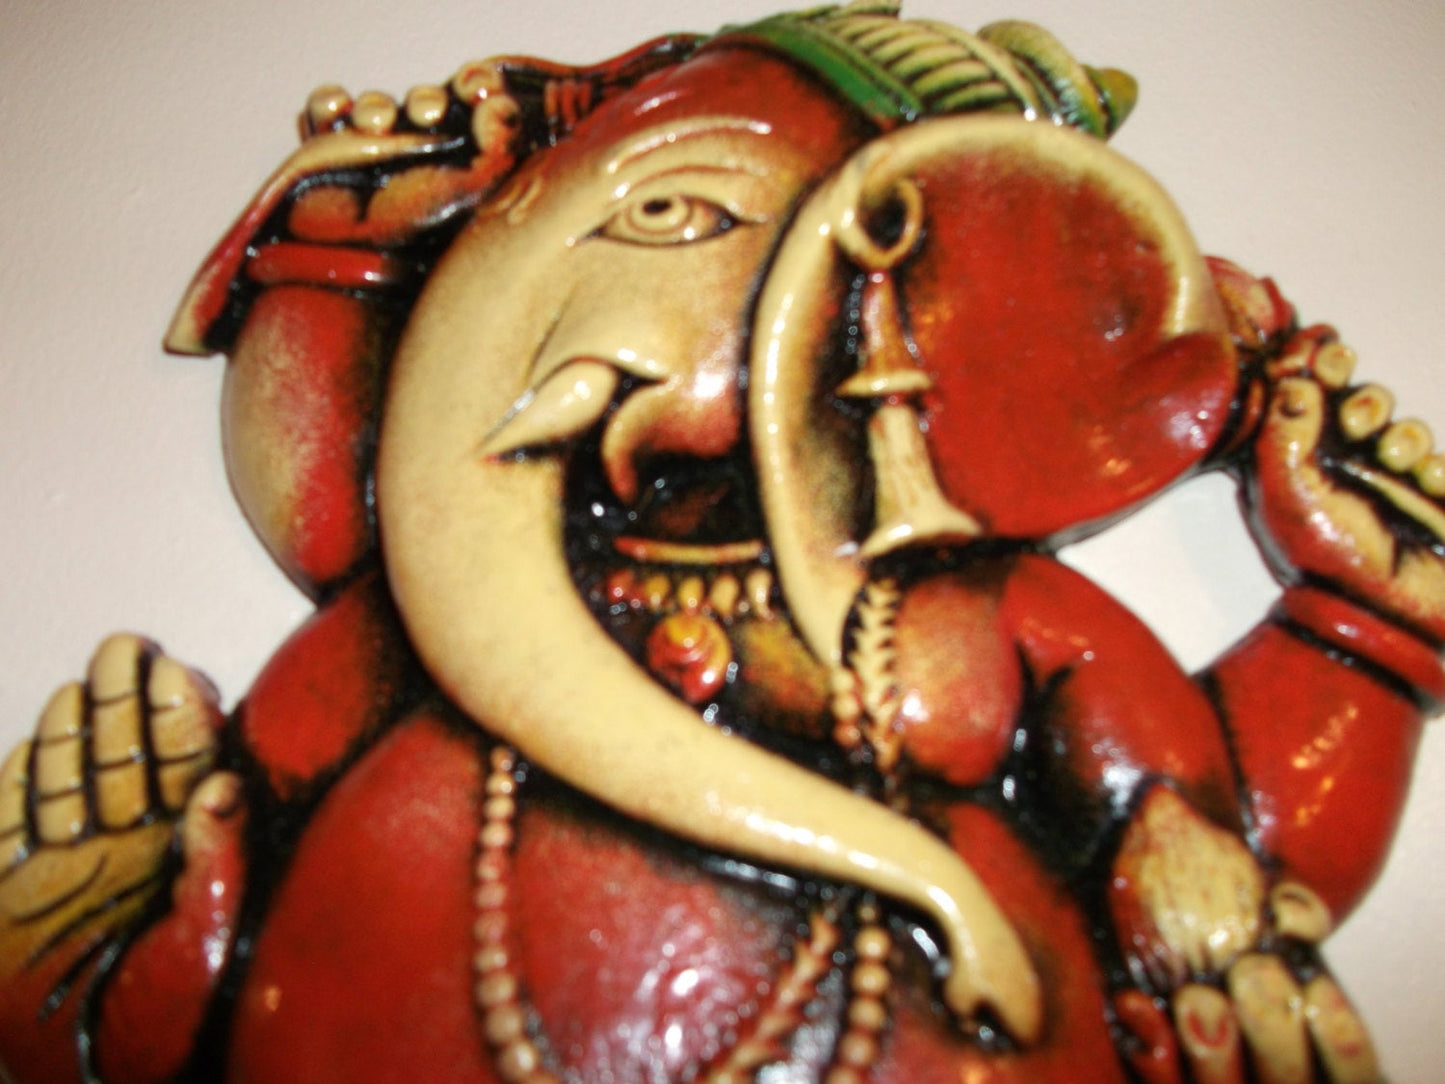 Bring good luck to your home-Fab gift Item :Hand- Painted unusaul, clay Ganeshe Wall Plaques Wonkey Donkey Bazaar